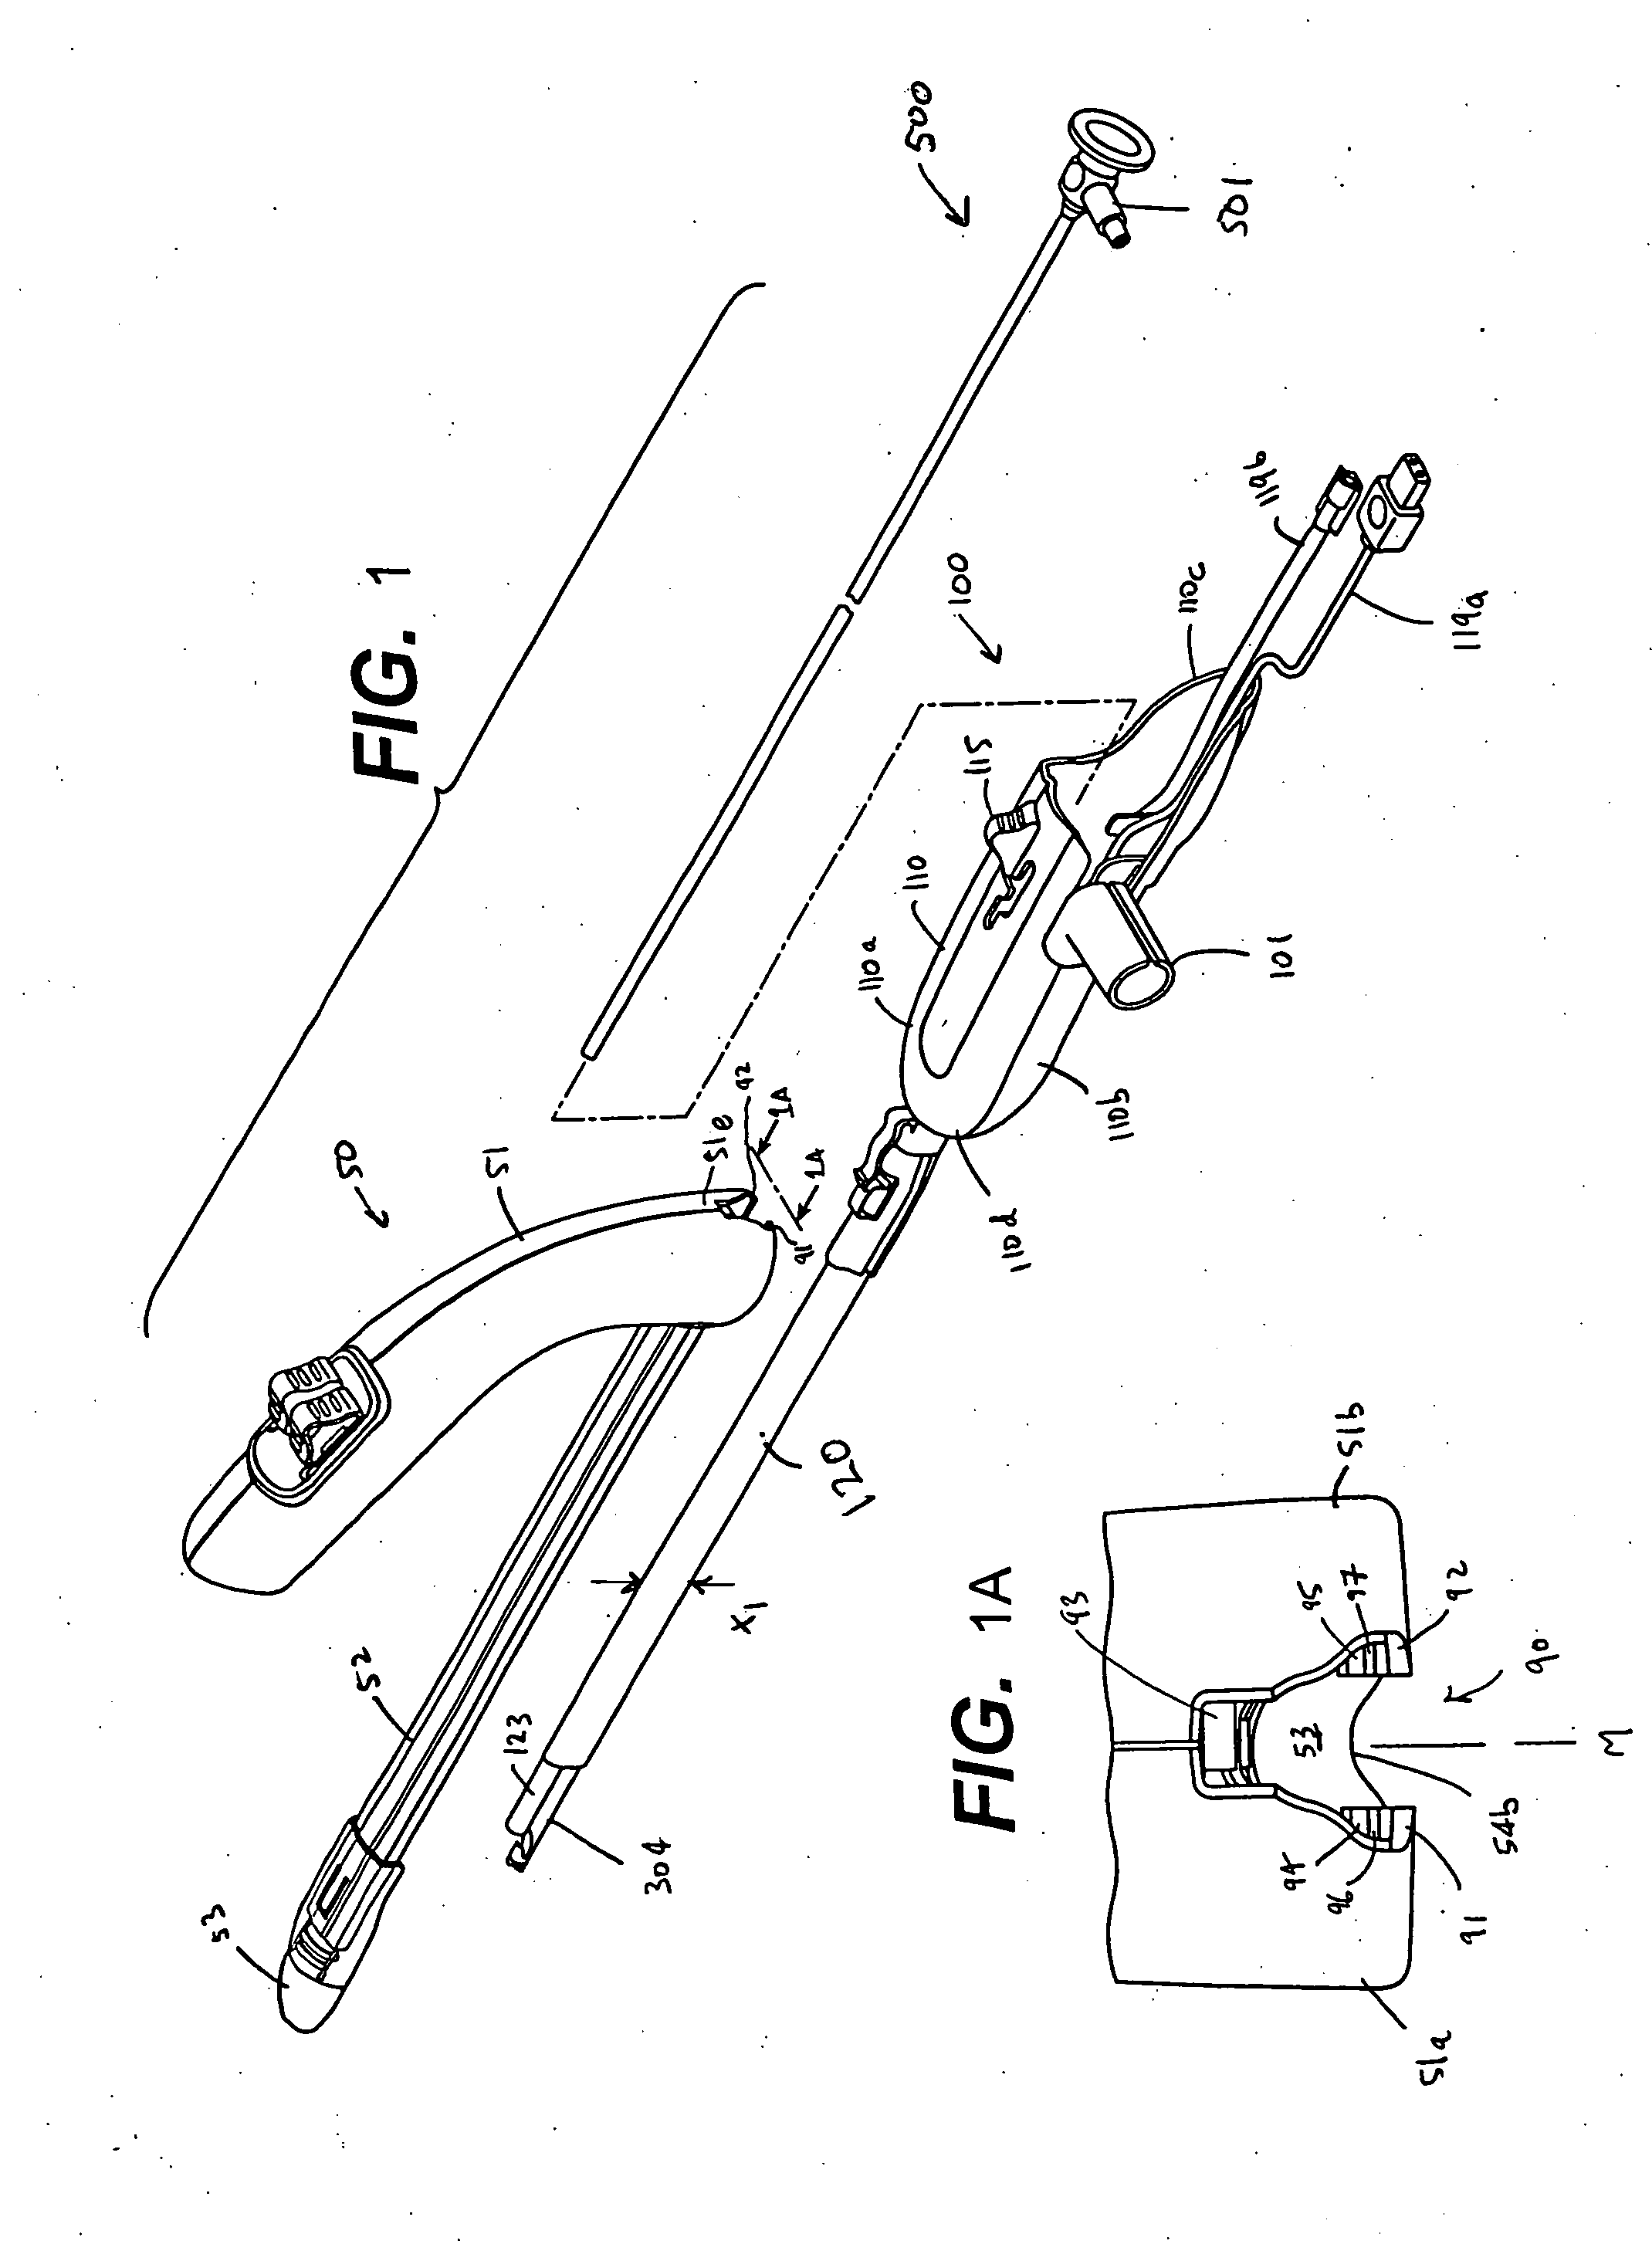 Multitool surgical device